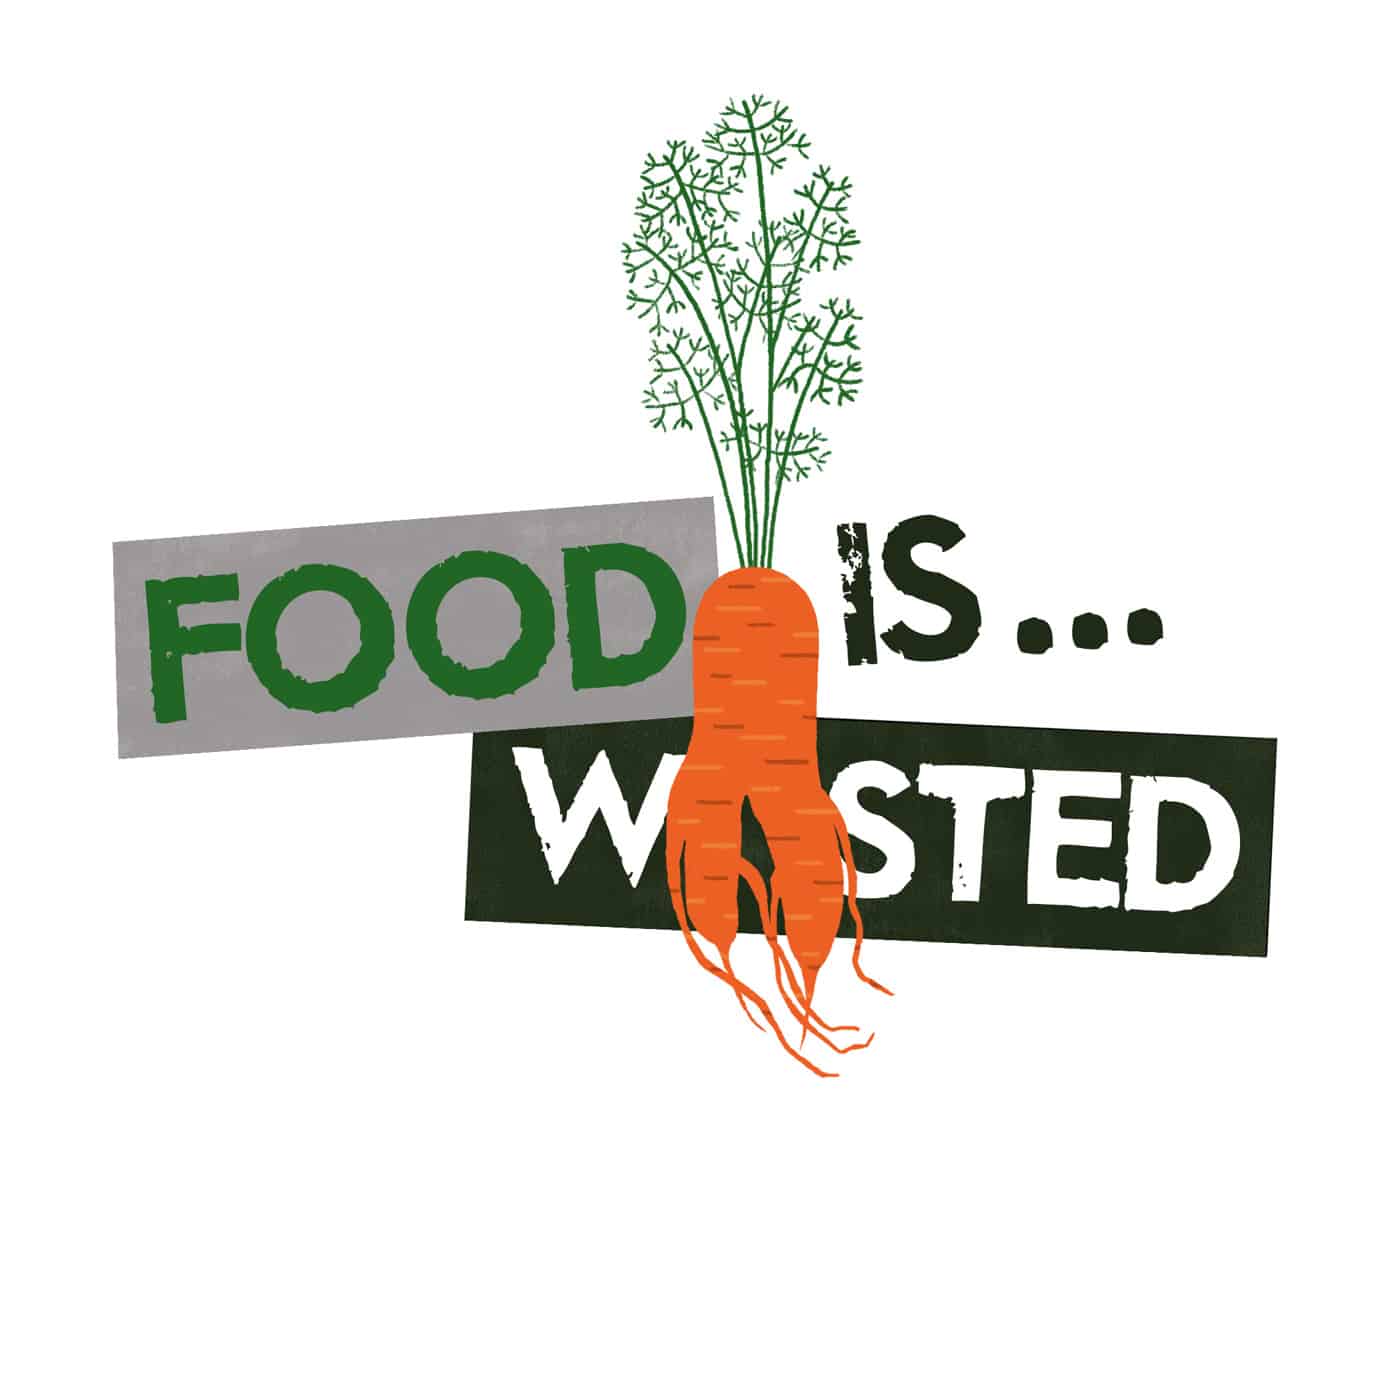 Food is Wasted logo - Podcast production by Open Eye Media